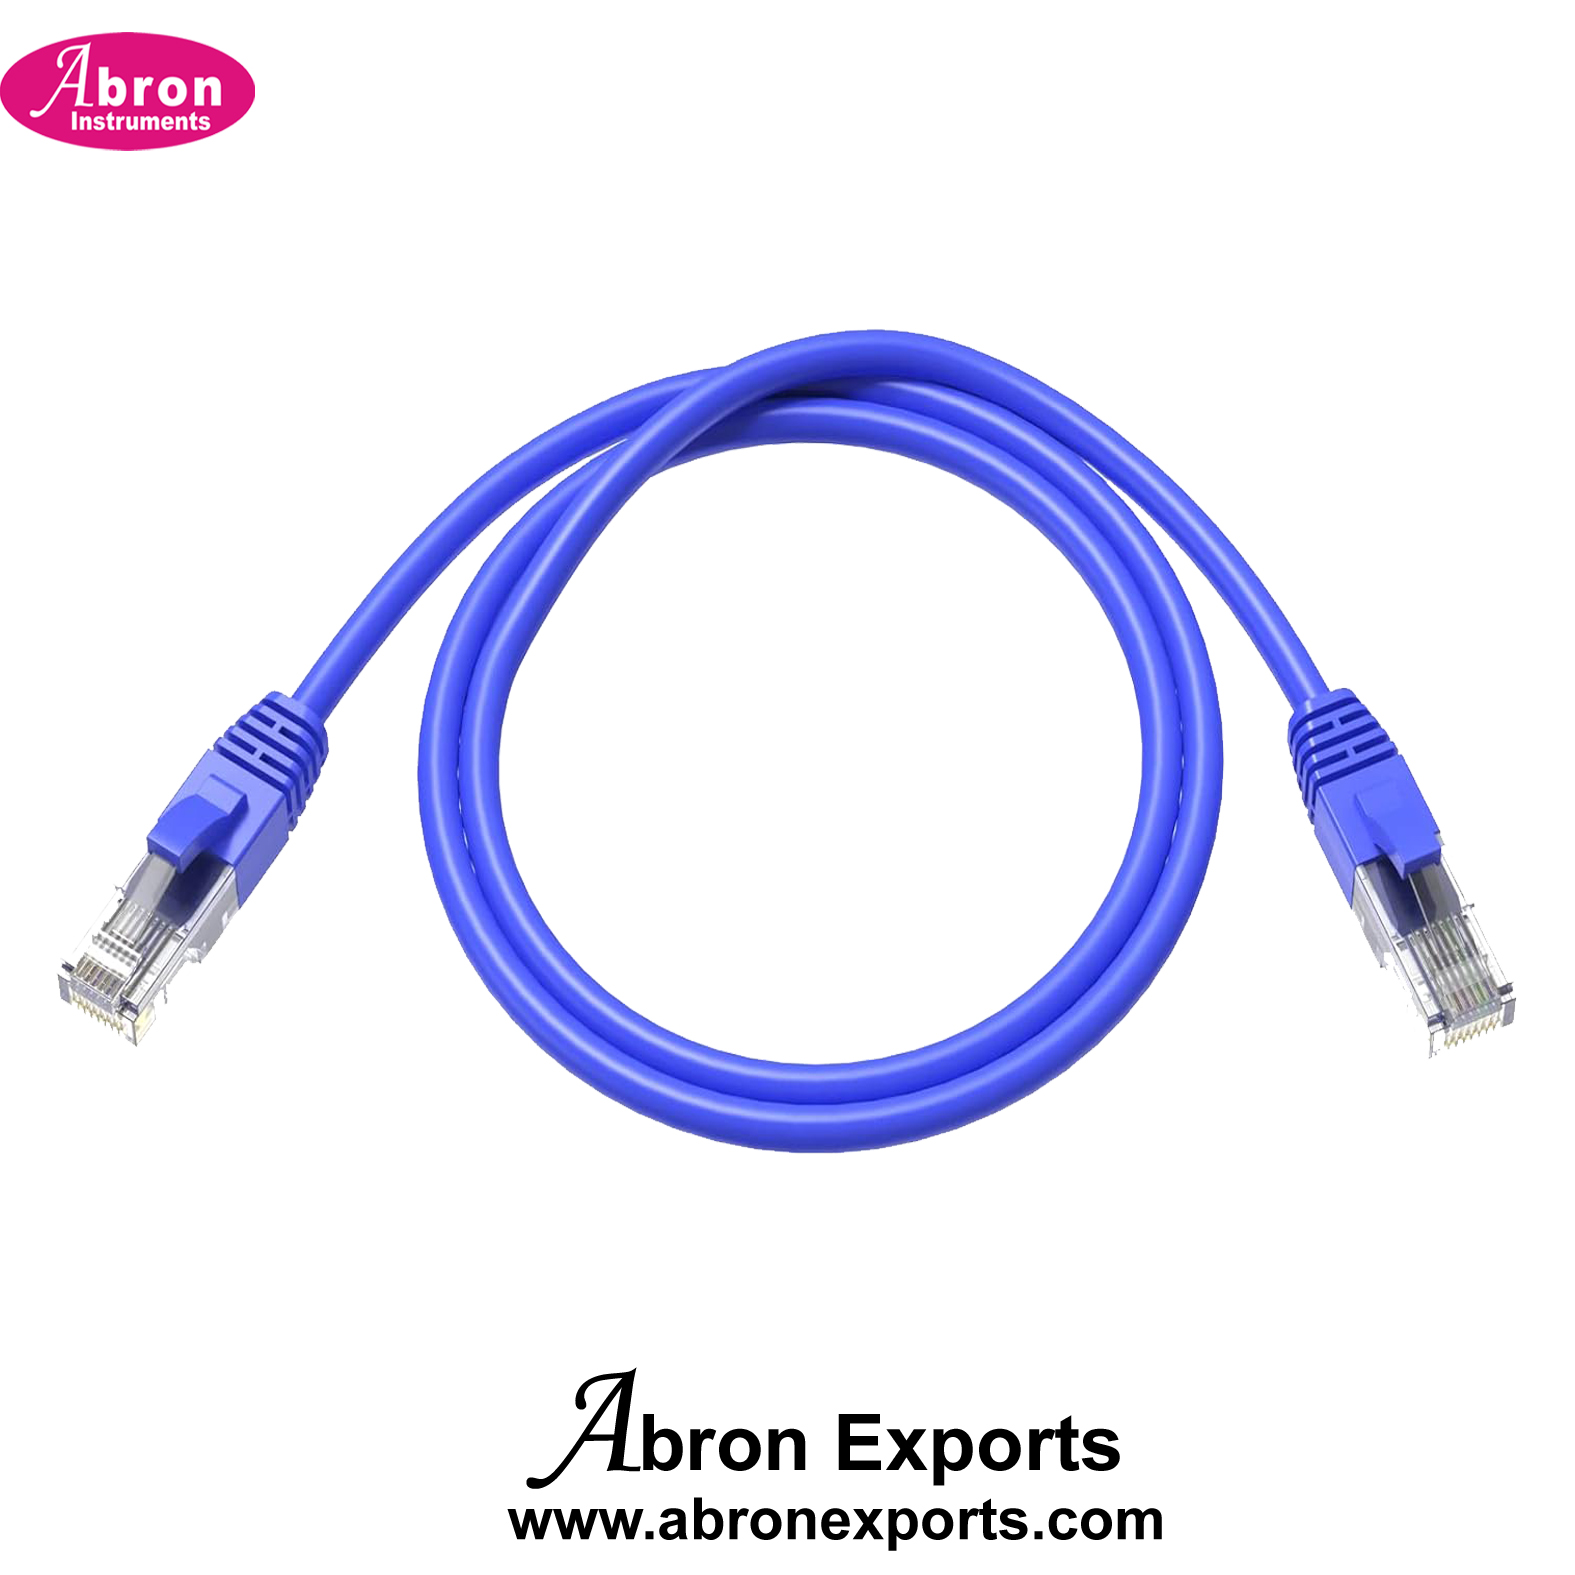 Electronic Spare Cable Lan Wire CAT 5e Ethernet Patch Cable, RJ45 Computer Network Cord Copper Wire 10pc Abron AE-1224LW 